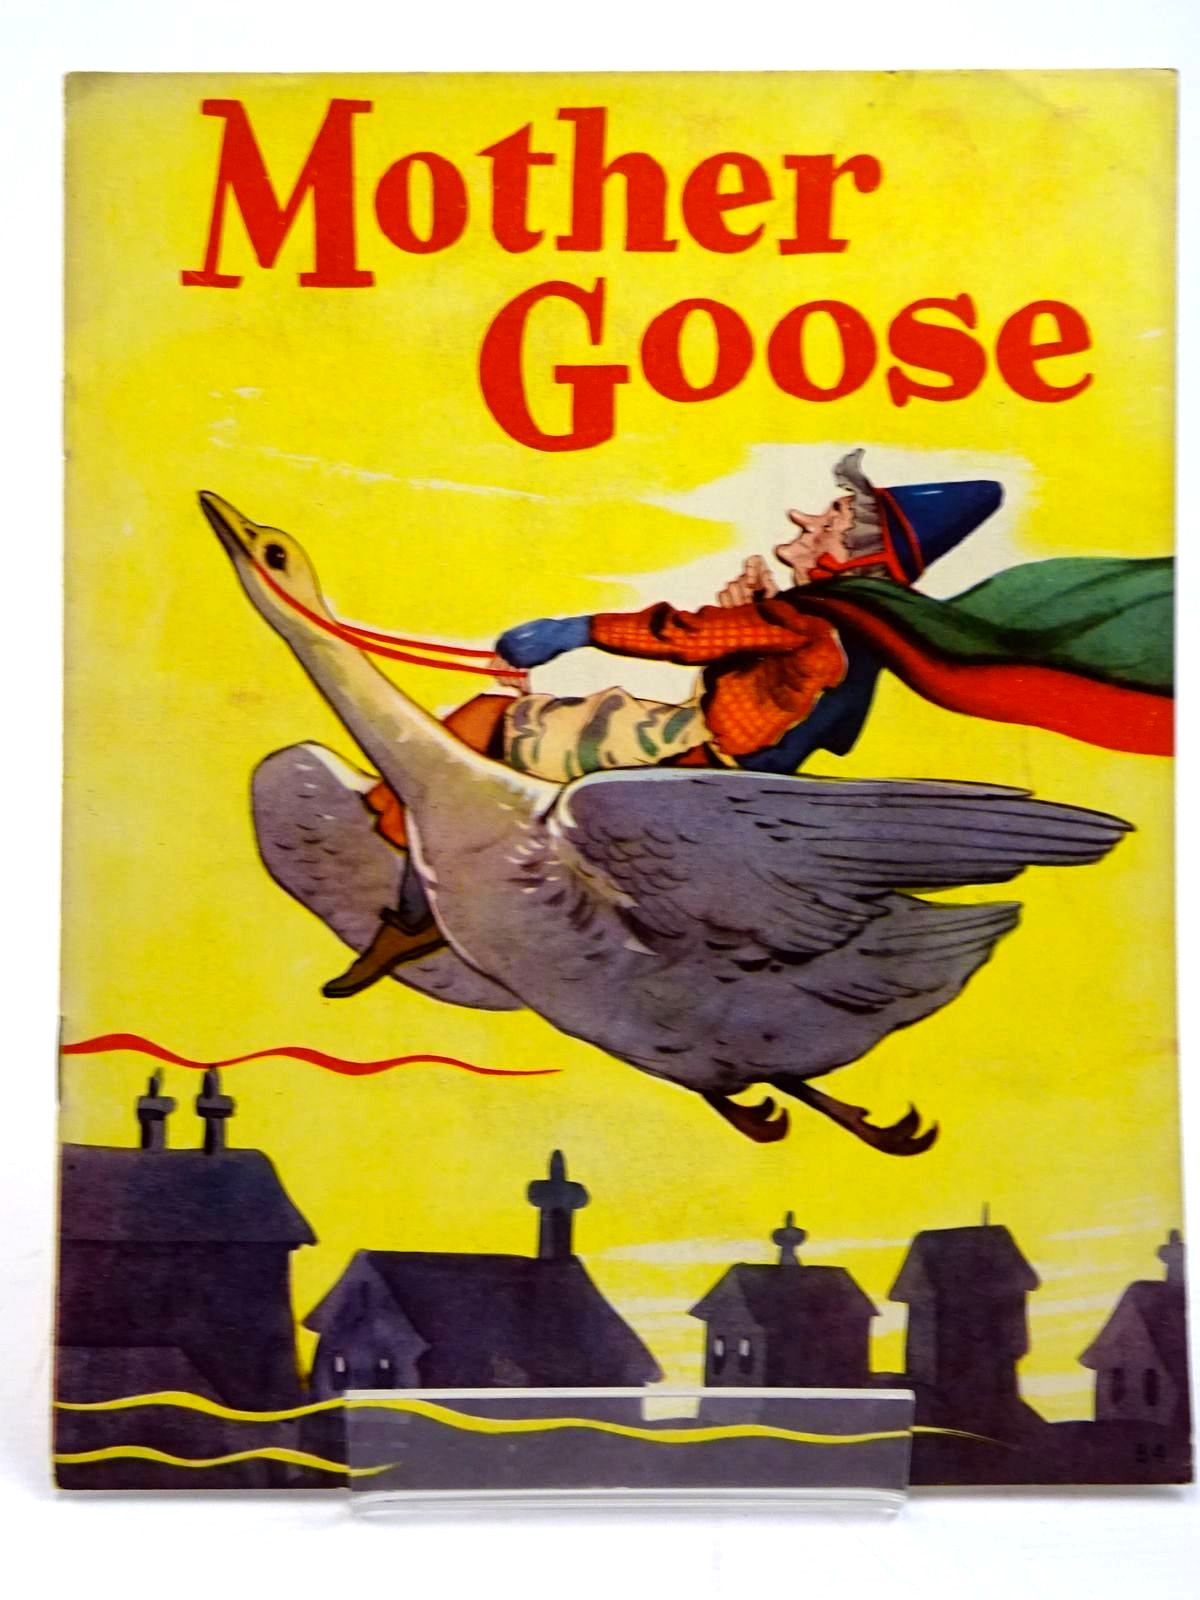 Photo of MOTHER GOOSE published by Wm. Collins Sons & Co. Ltd. (STOCK CODE: 2131562)  for sale by Stella & Rose's Books